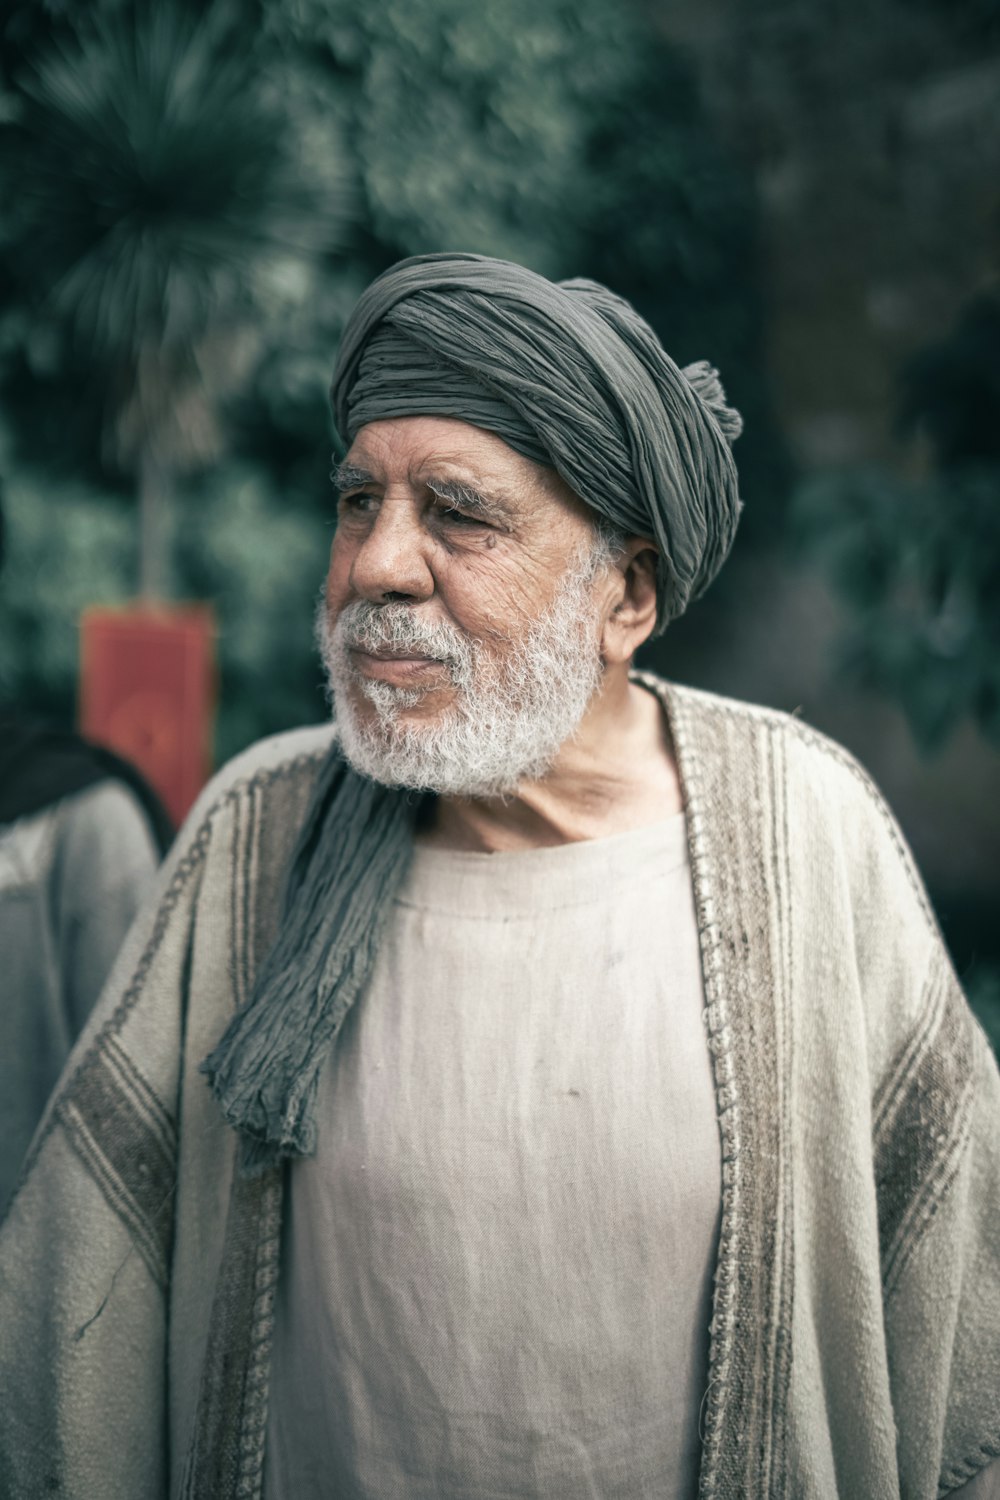 a man with a white beard and a gray turban